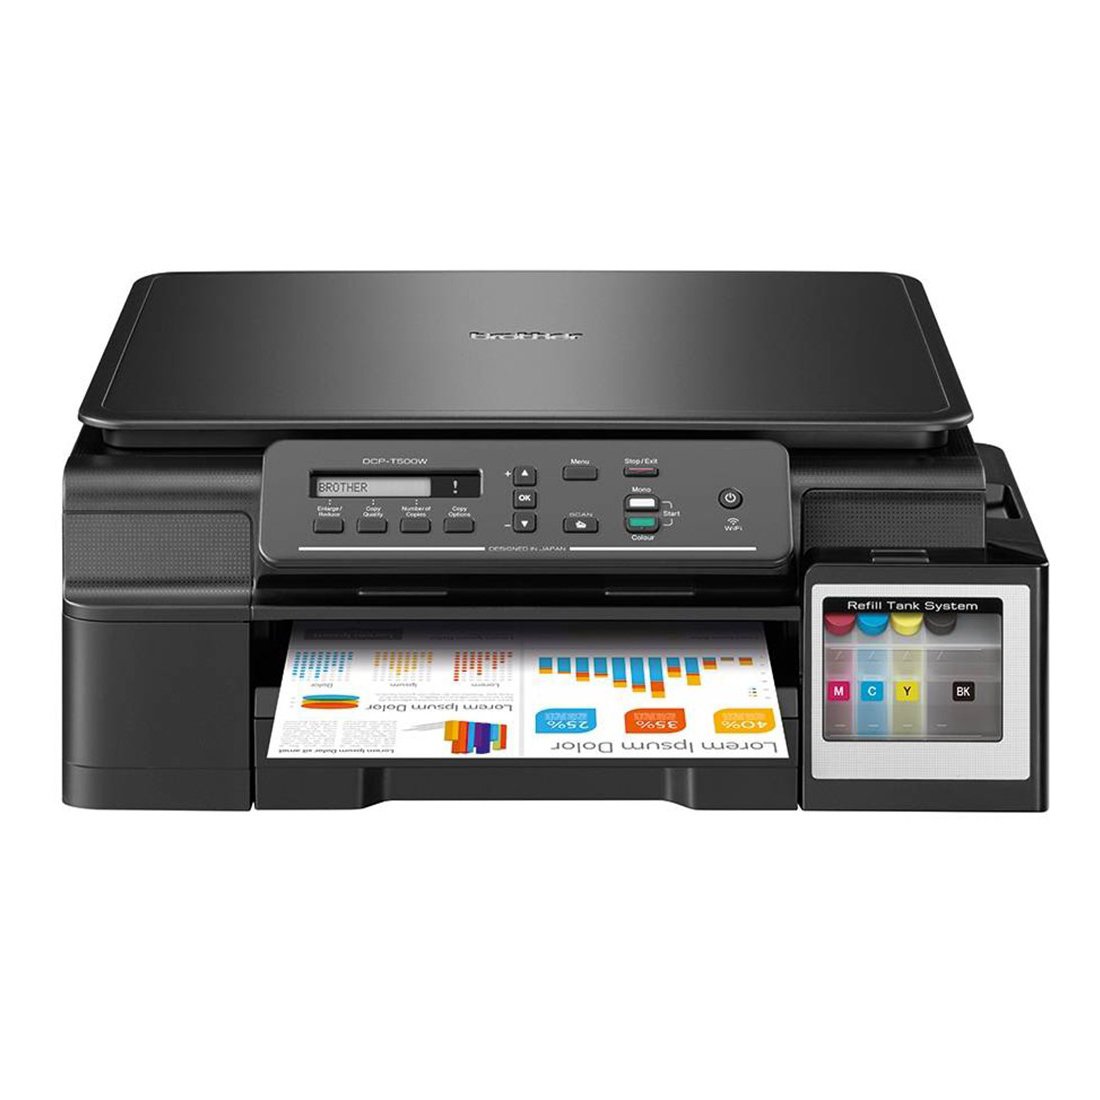 BROTHER Printer DCP-T510W